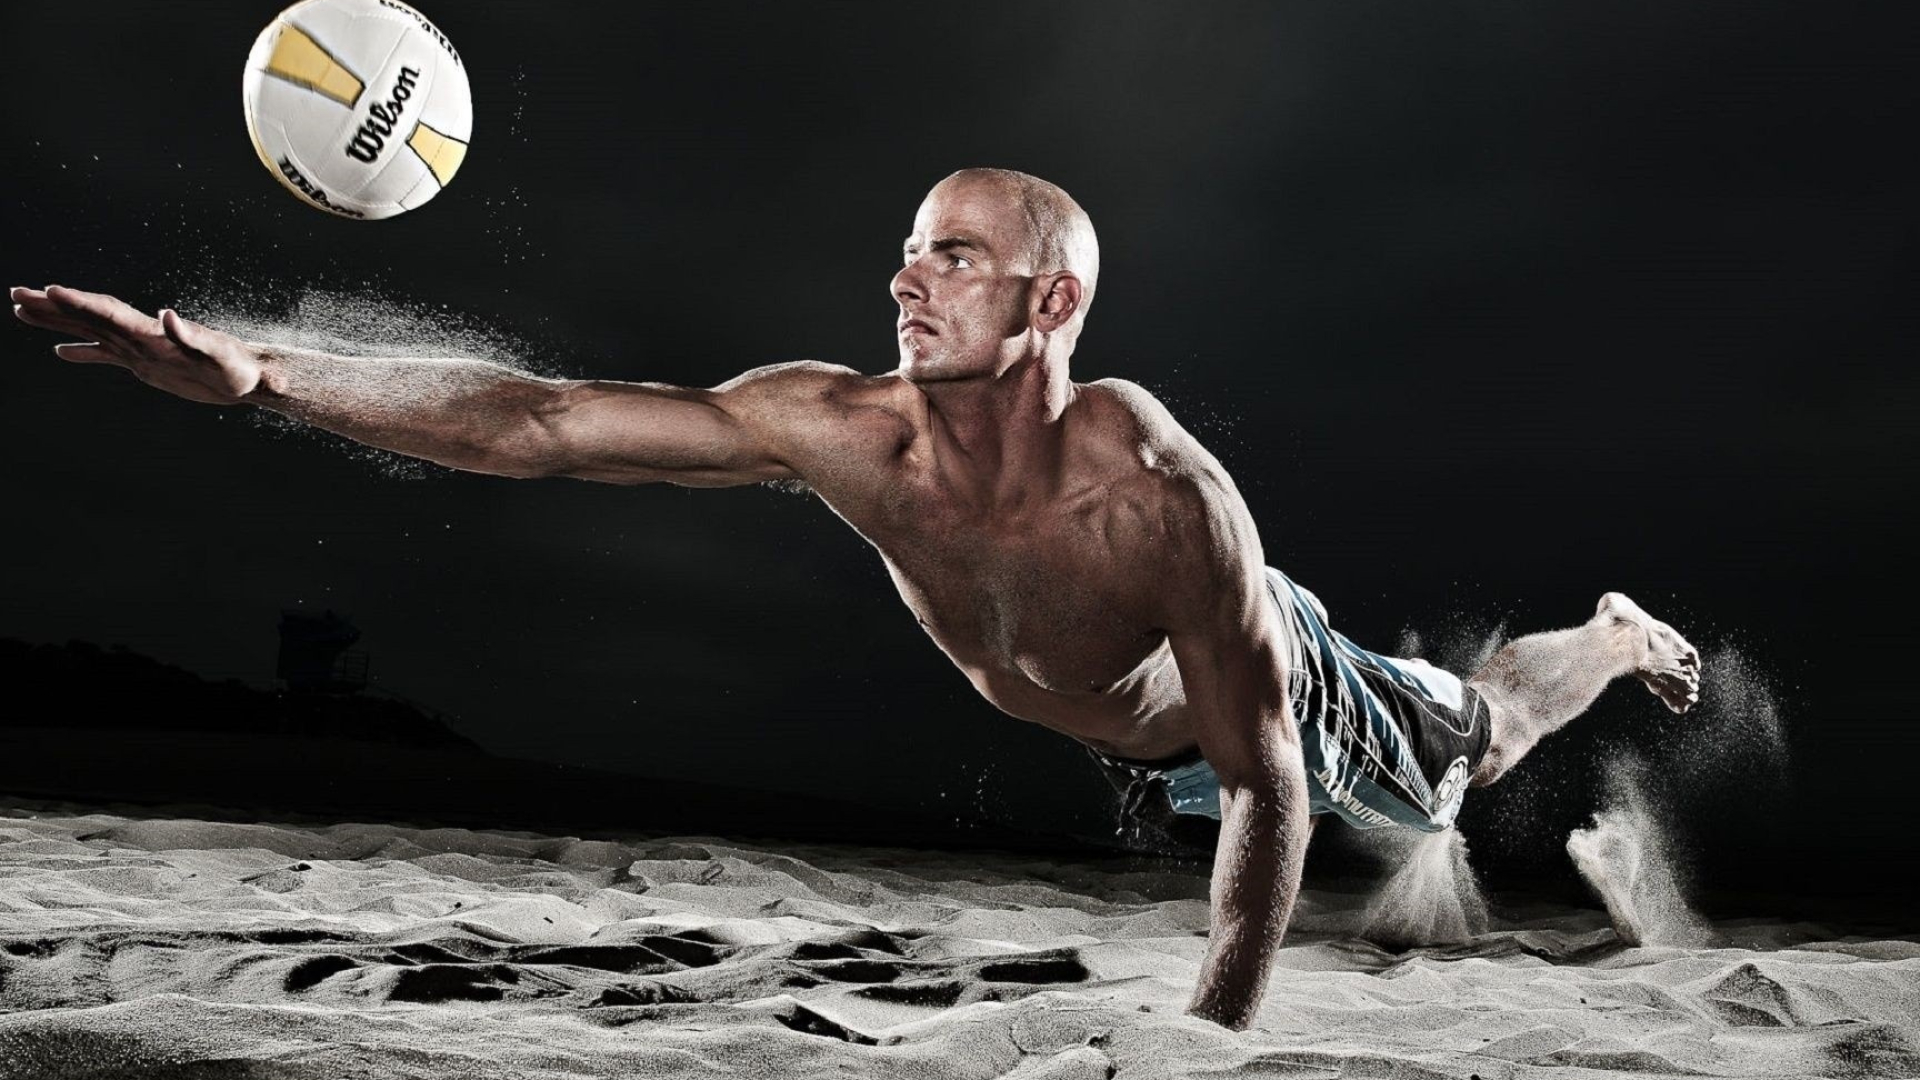 Beach Volleyball: Men's Tournament Upcoming Events, World Championships Rome 2022. 1920x1080 Full HD Background.